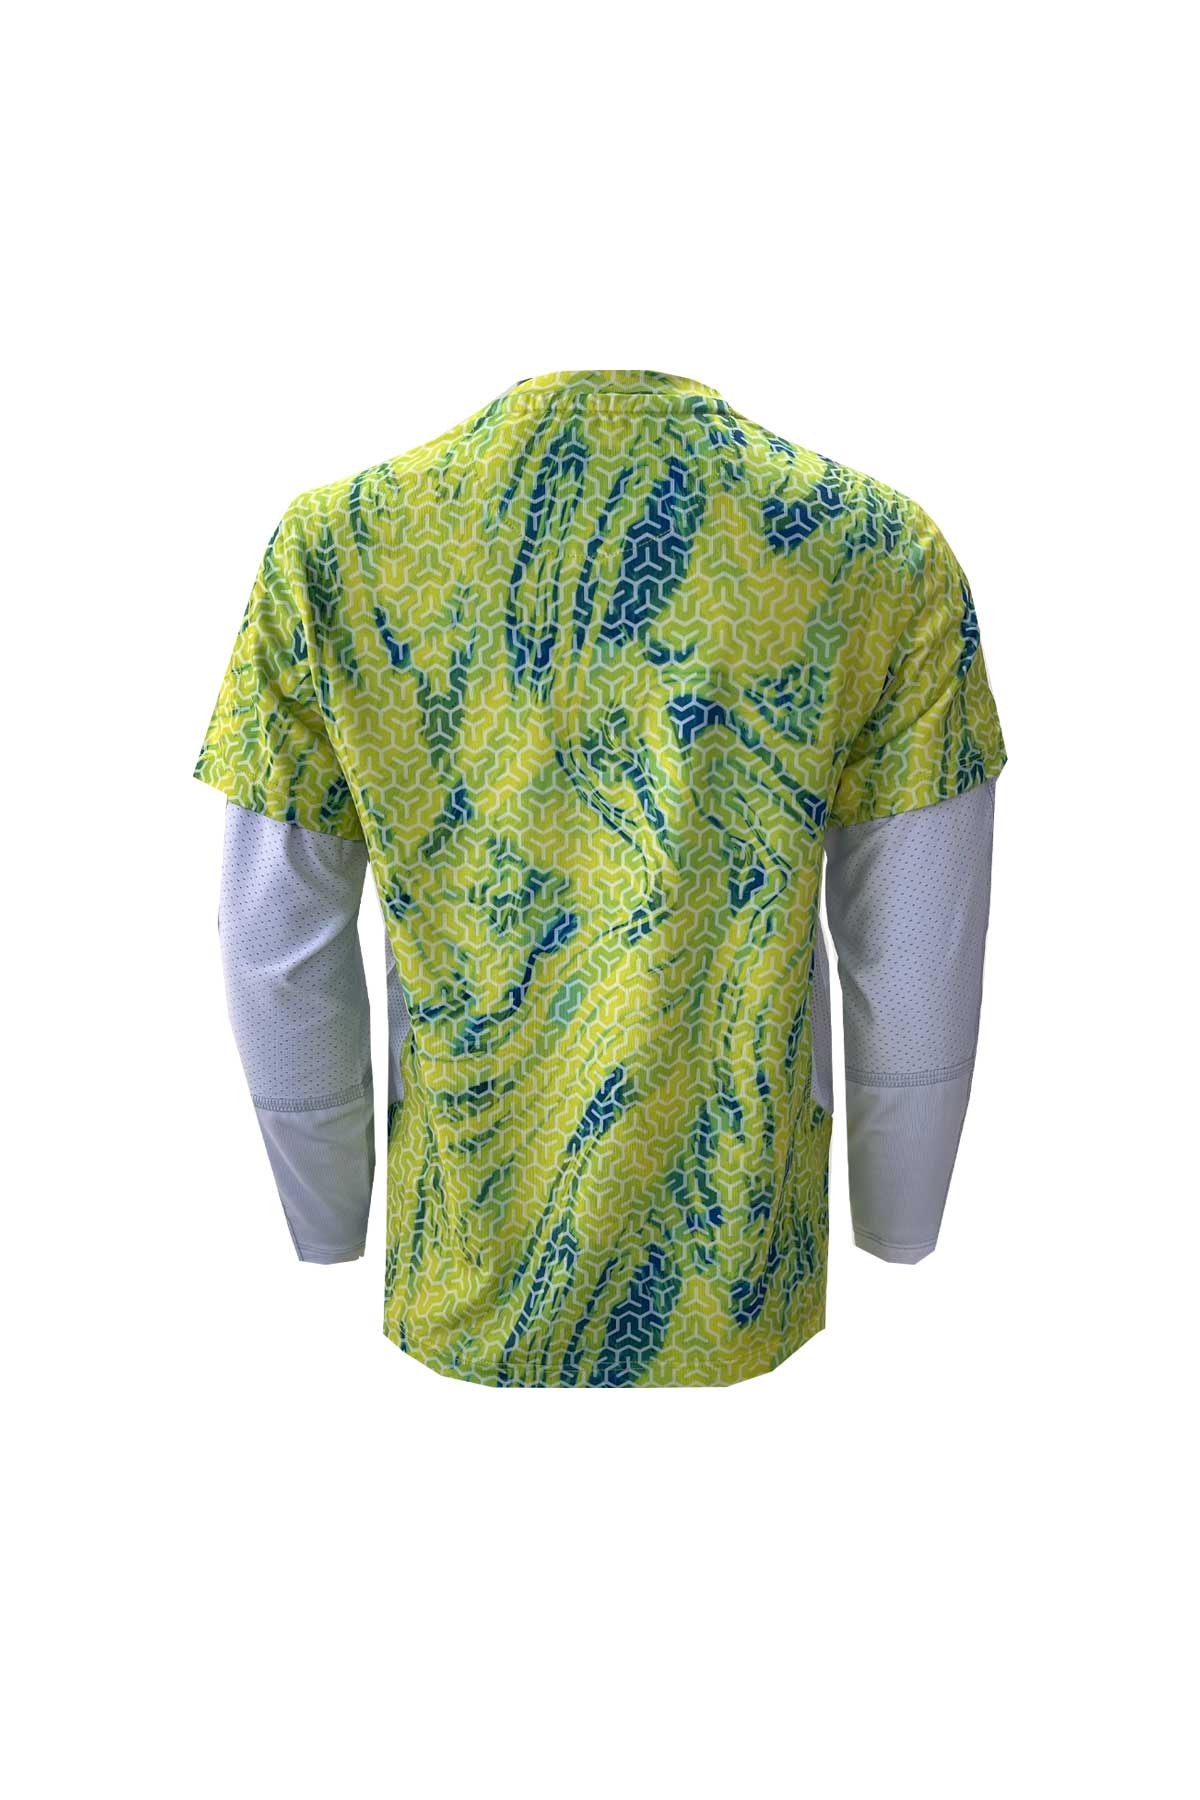 Ahoy Jr. Long And Short Sleeve Together Fishing Shirt - Trophy - Lime